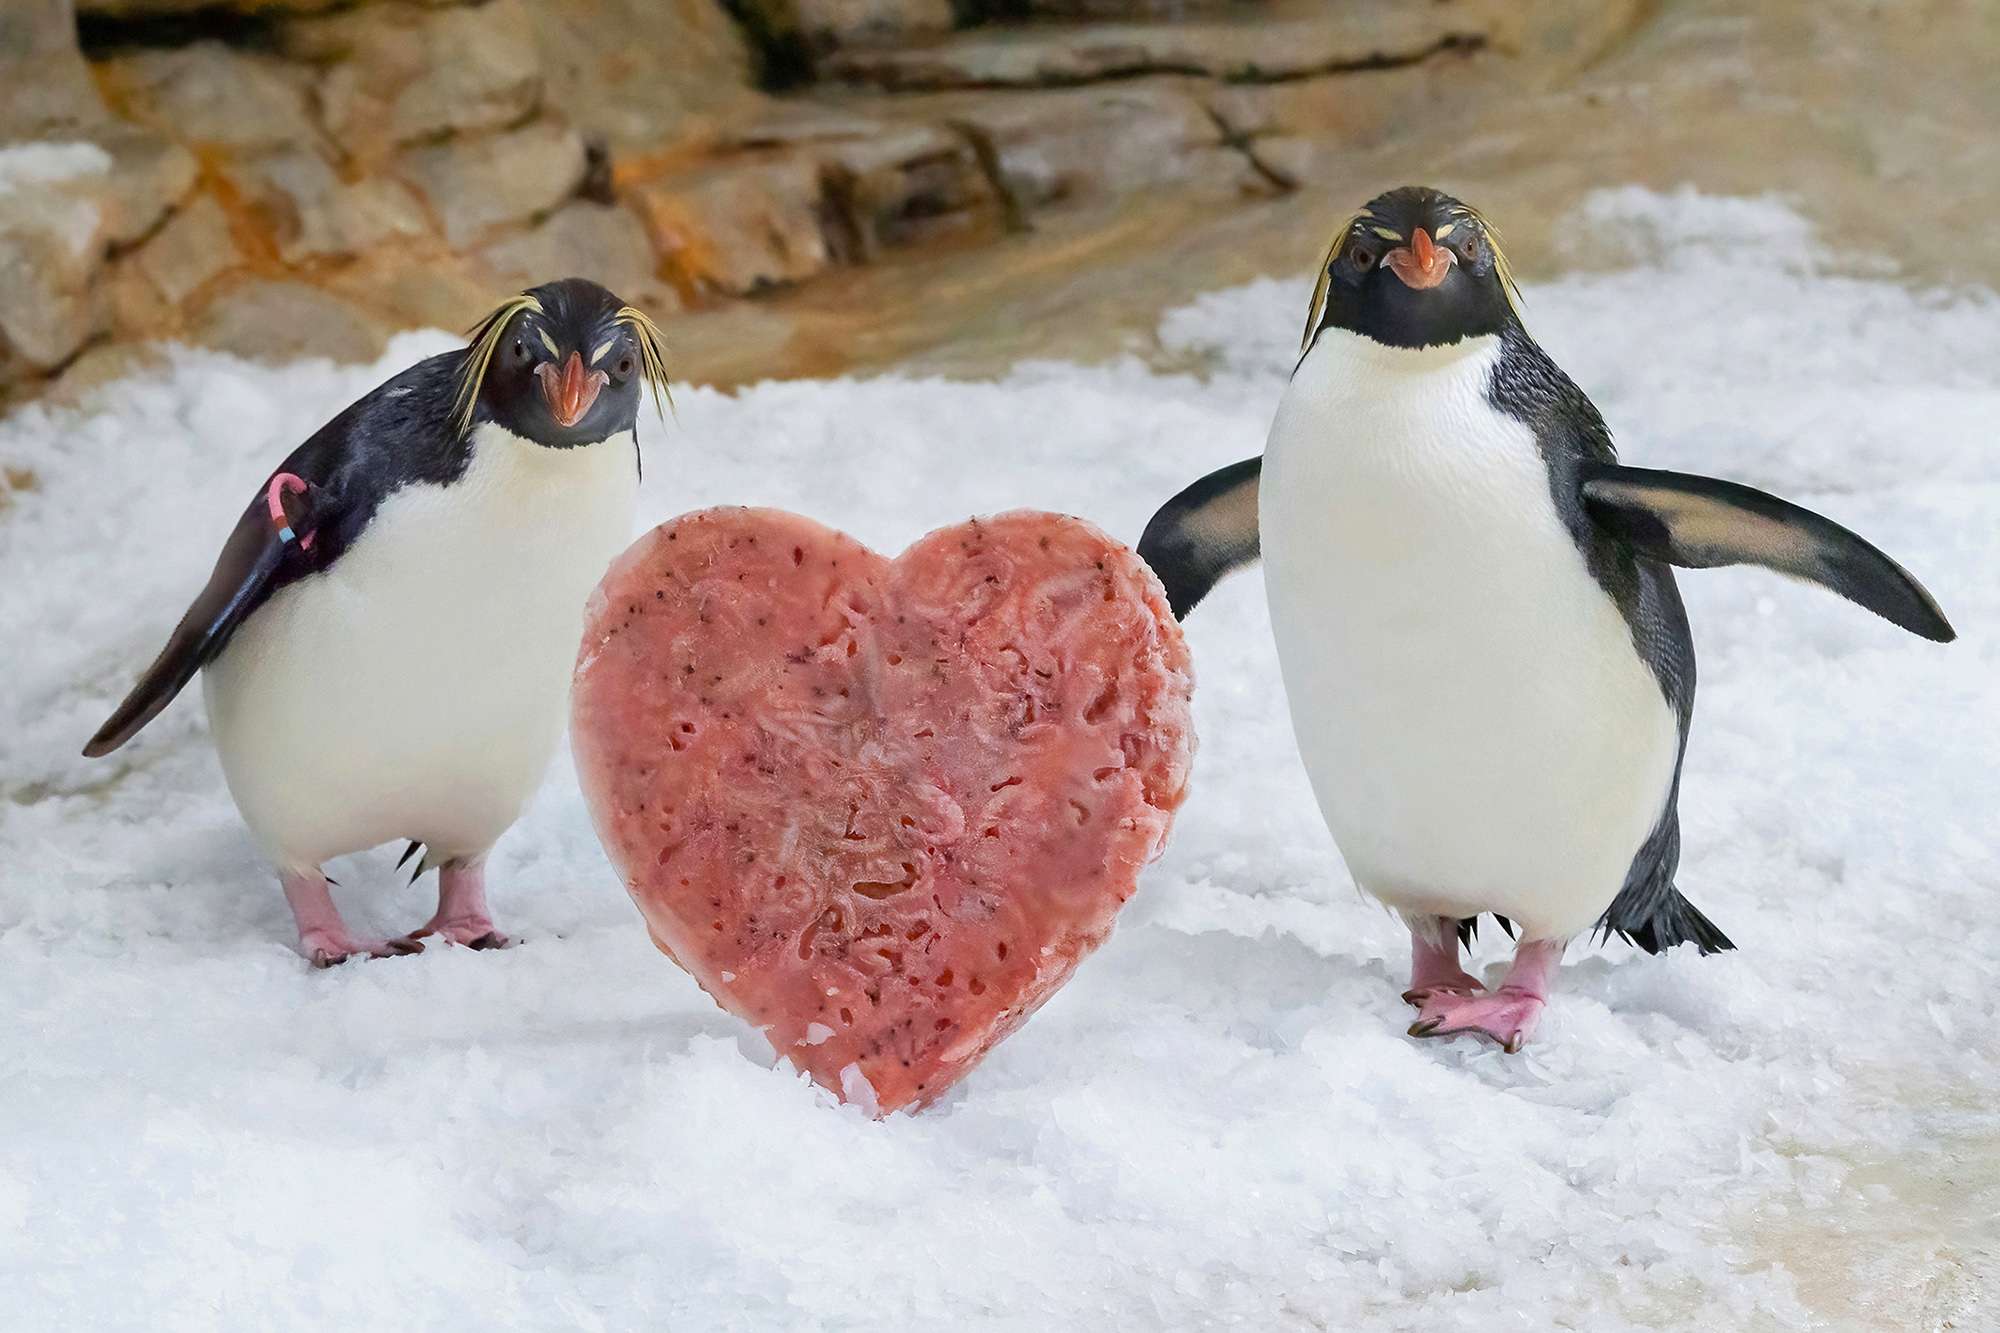 Read more about the article LOVE IS IN THE AIR: Penguins From World’s Oldest Zoo Receive A Special Heart-Shaped Treat For Valentine’s Day